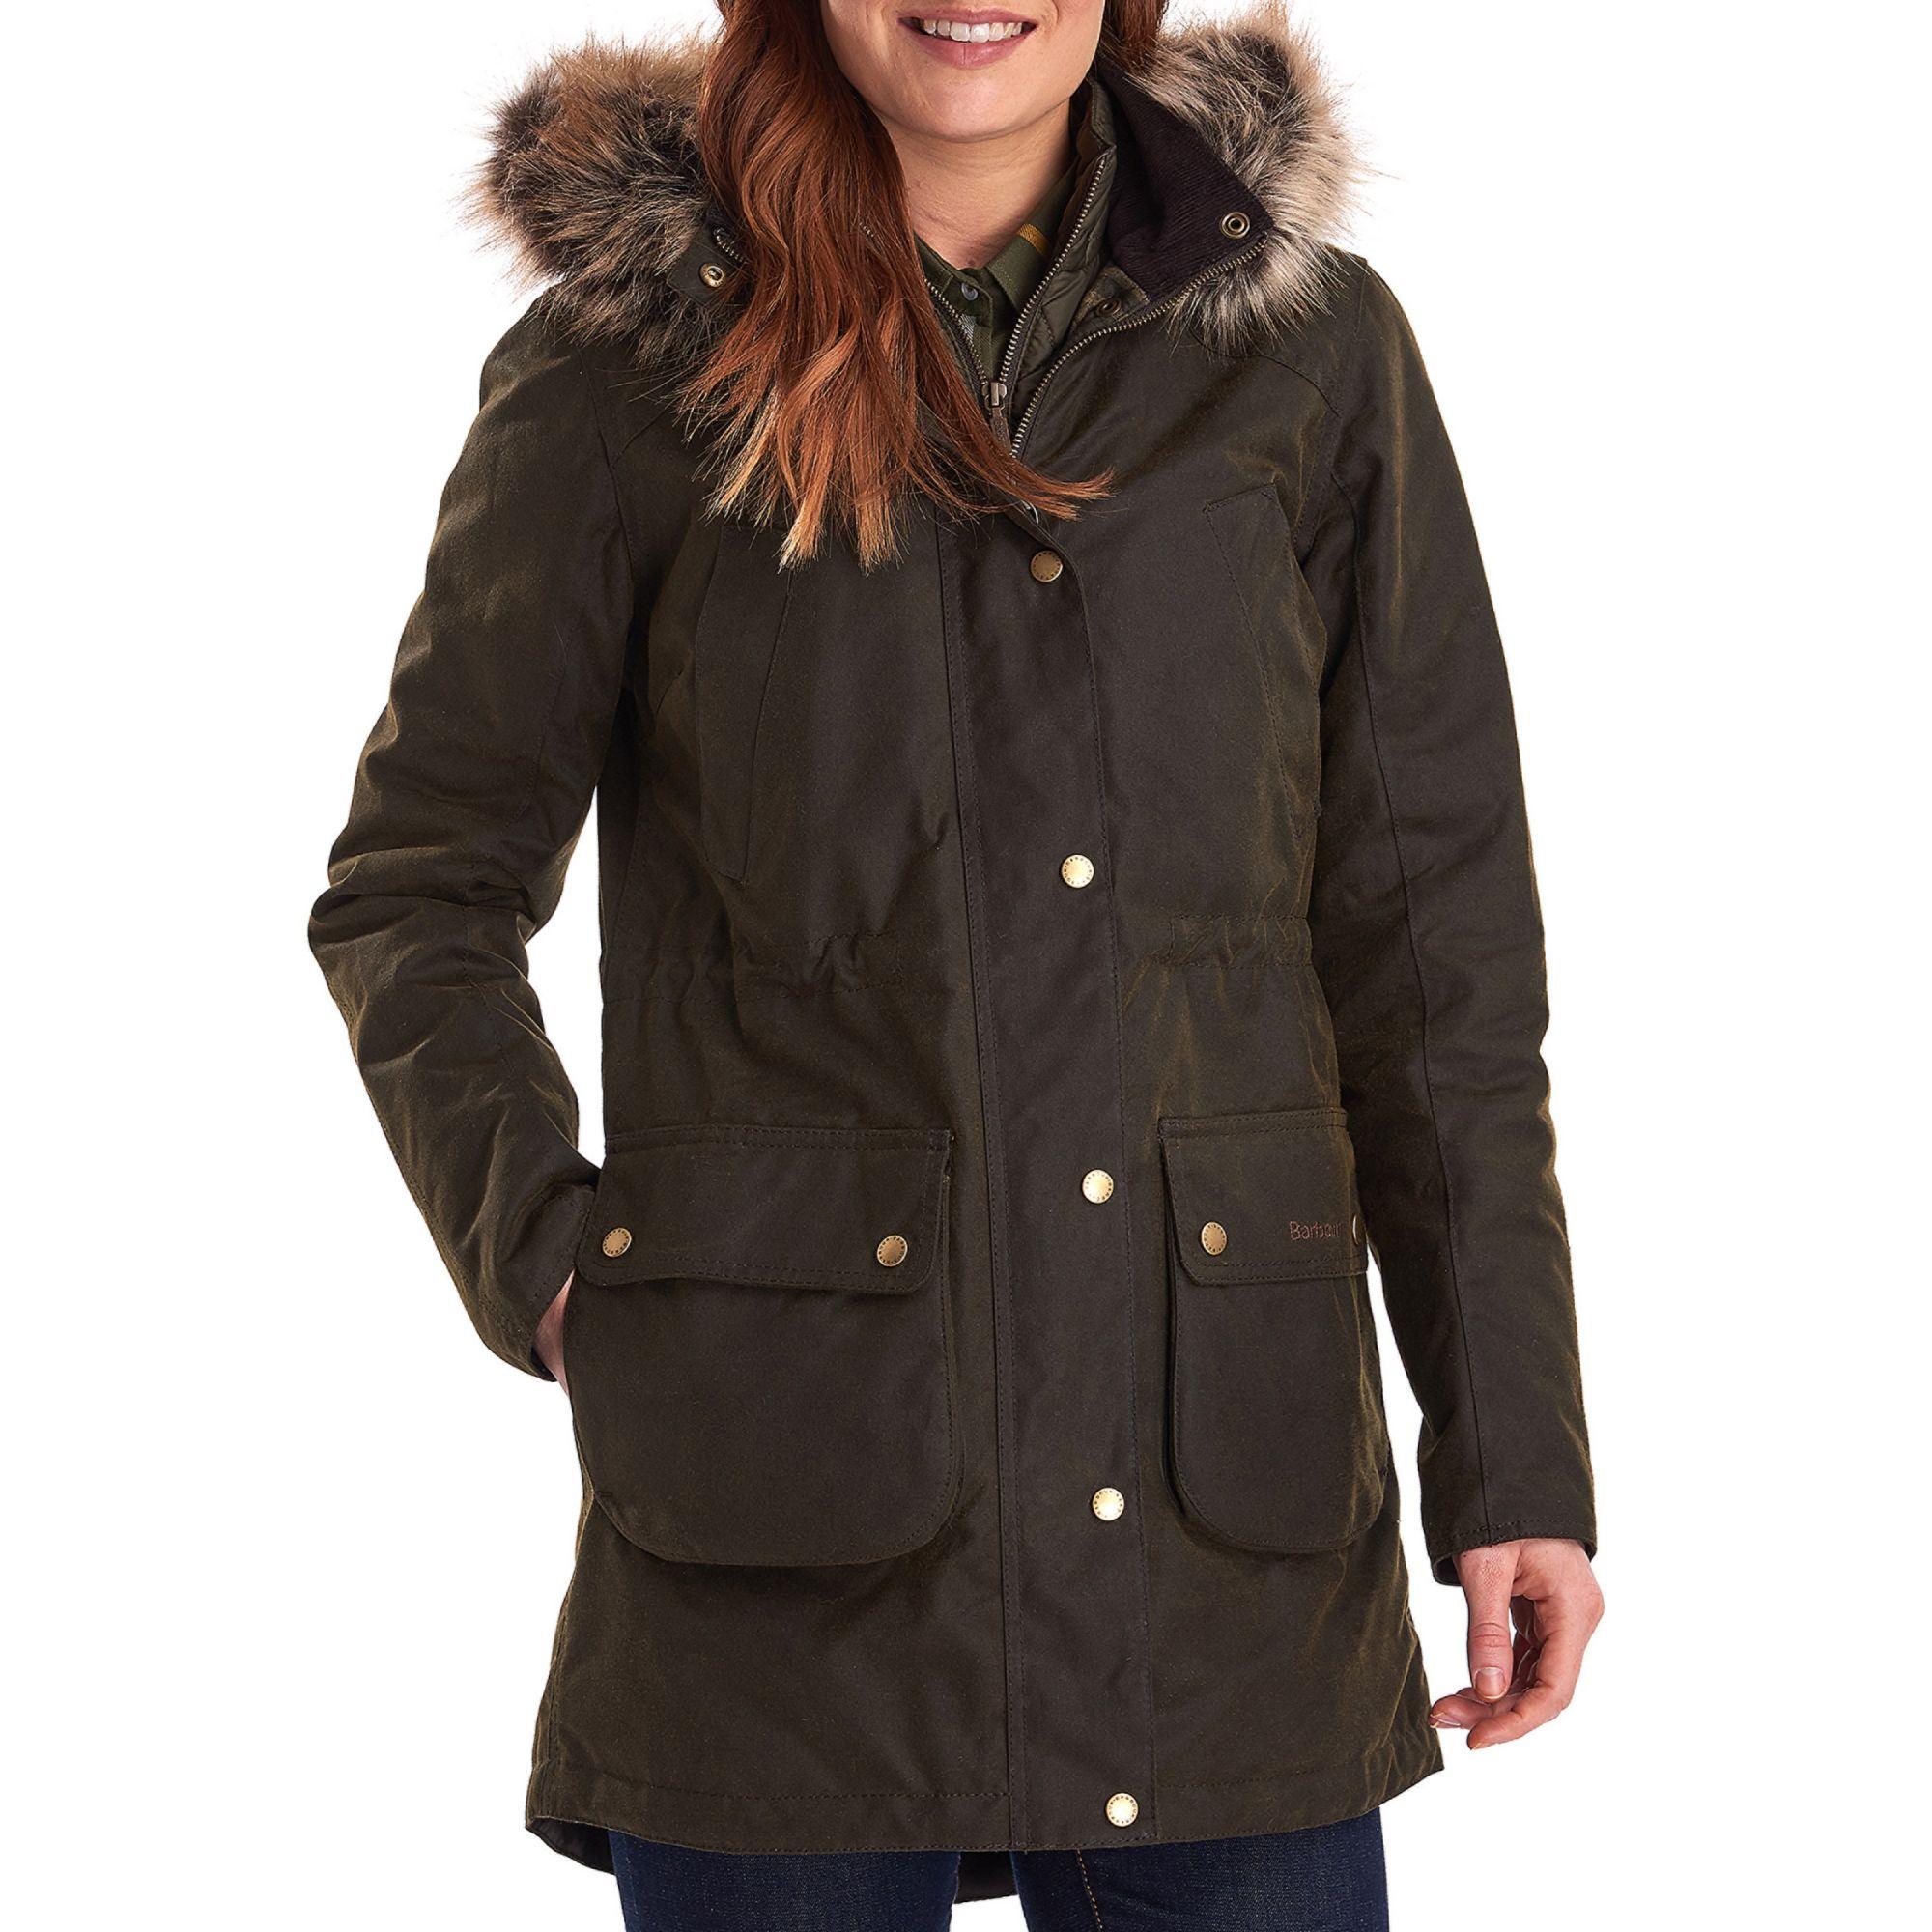 Barbour Kelsall Wax Parka in Olive (Green) - Lyst